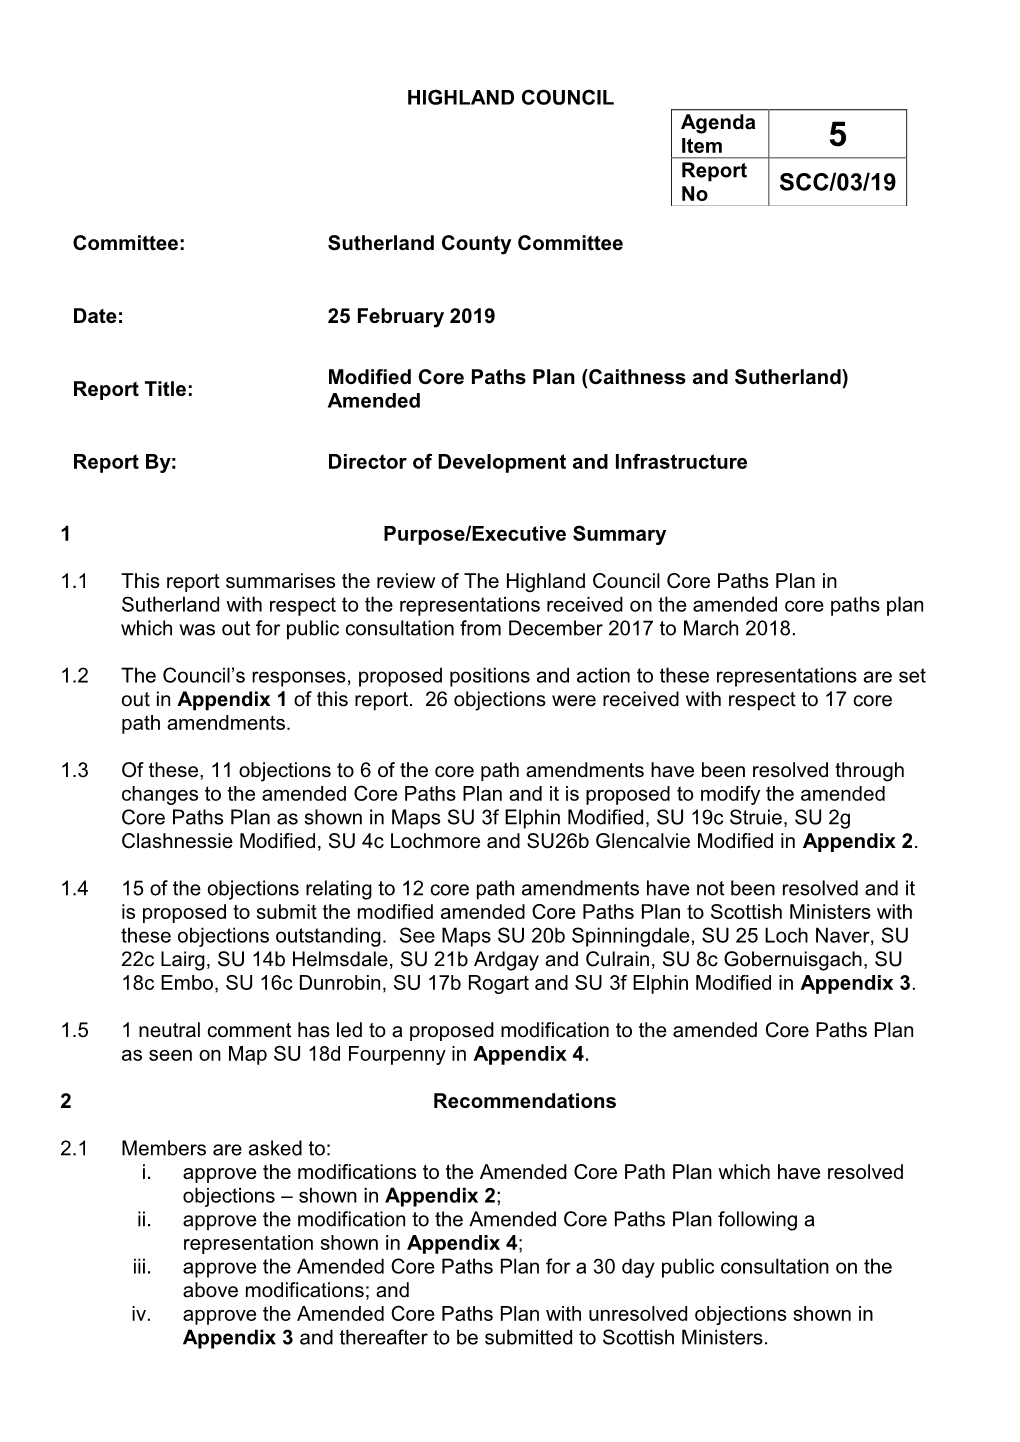 Modified Core Paths Plan (Caithness and Sutherland) Report Title: Amended